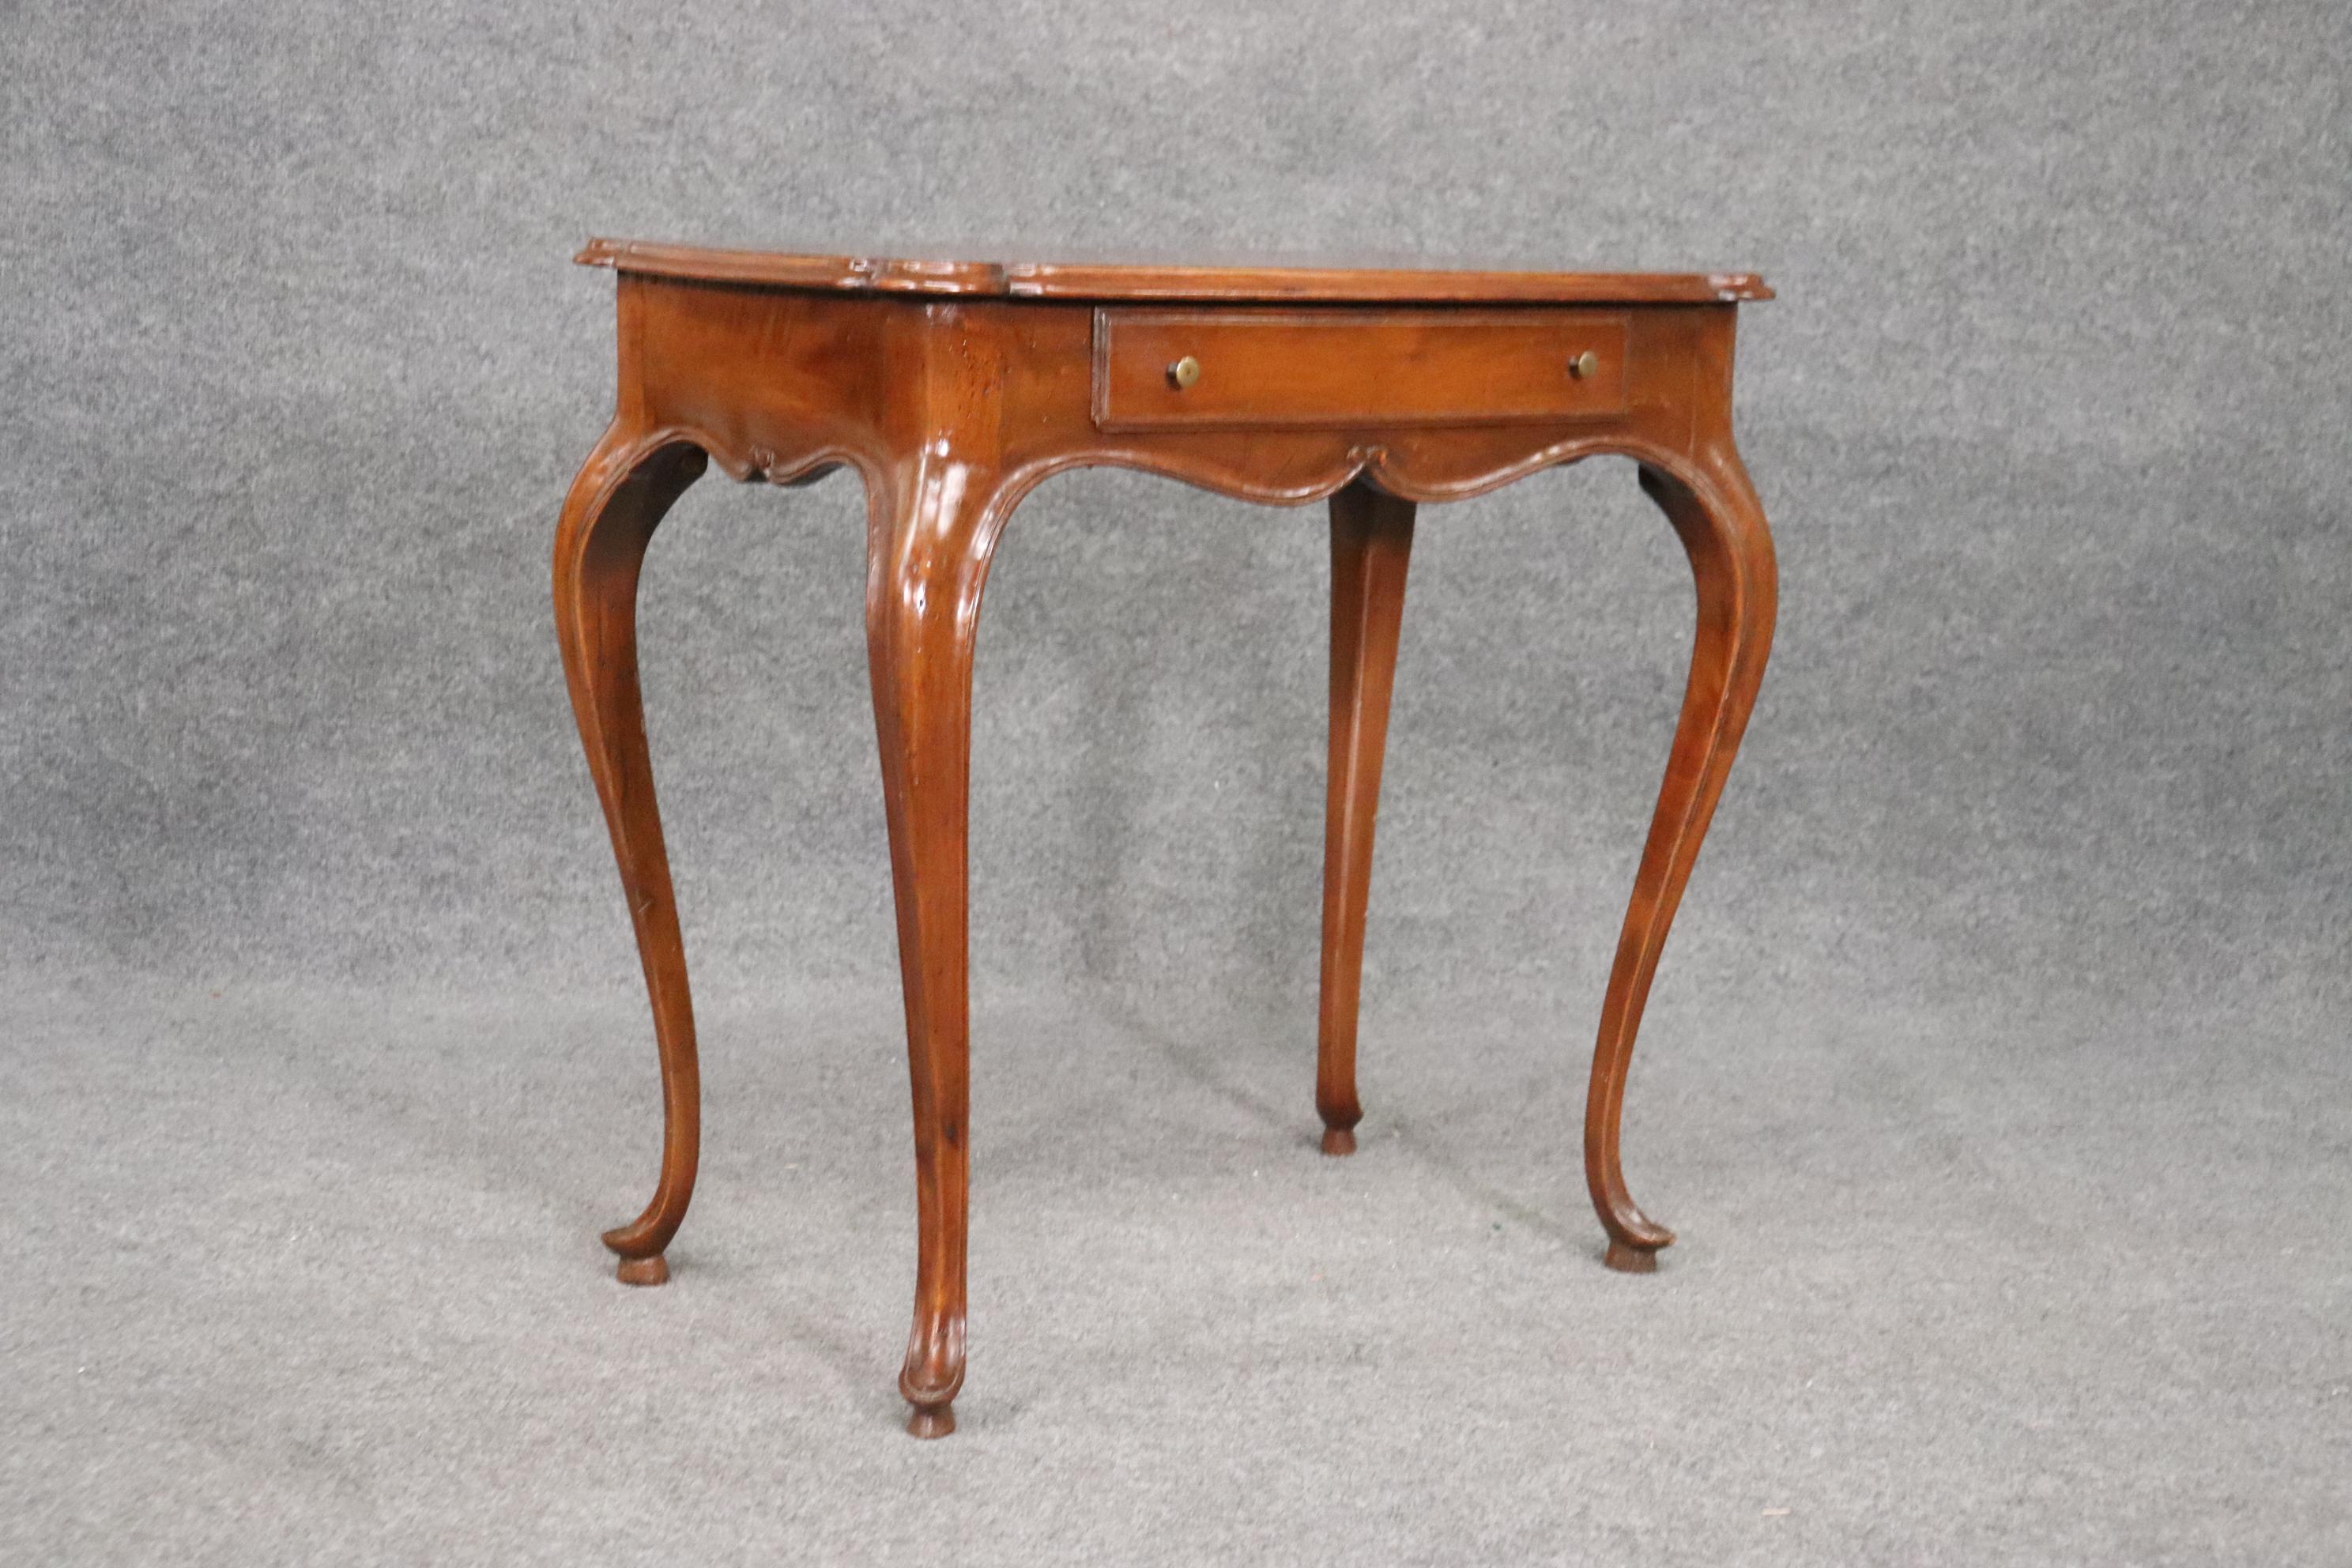 This is a fantastic antique French desk. The desk is in good condition and measures 19 inches deep x 31 wide x 30 inches tall. The desk dates to teh 1920s.